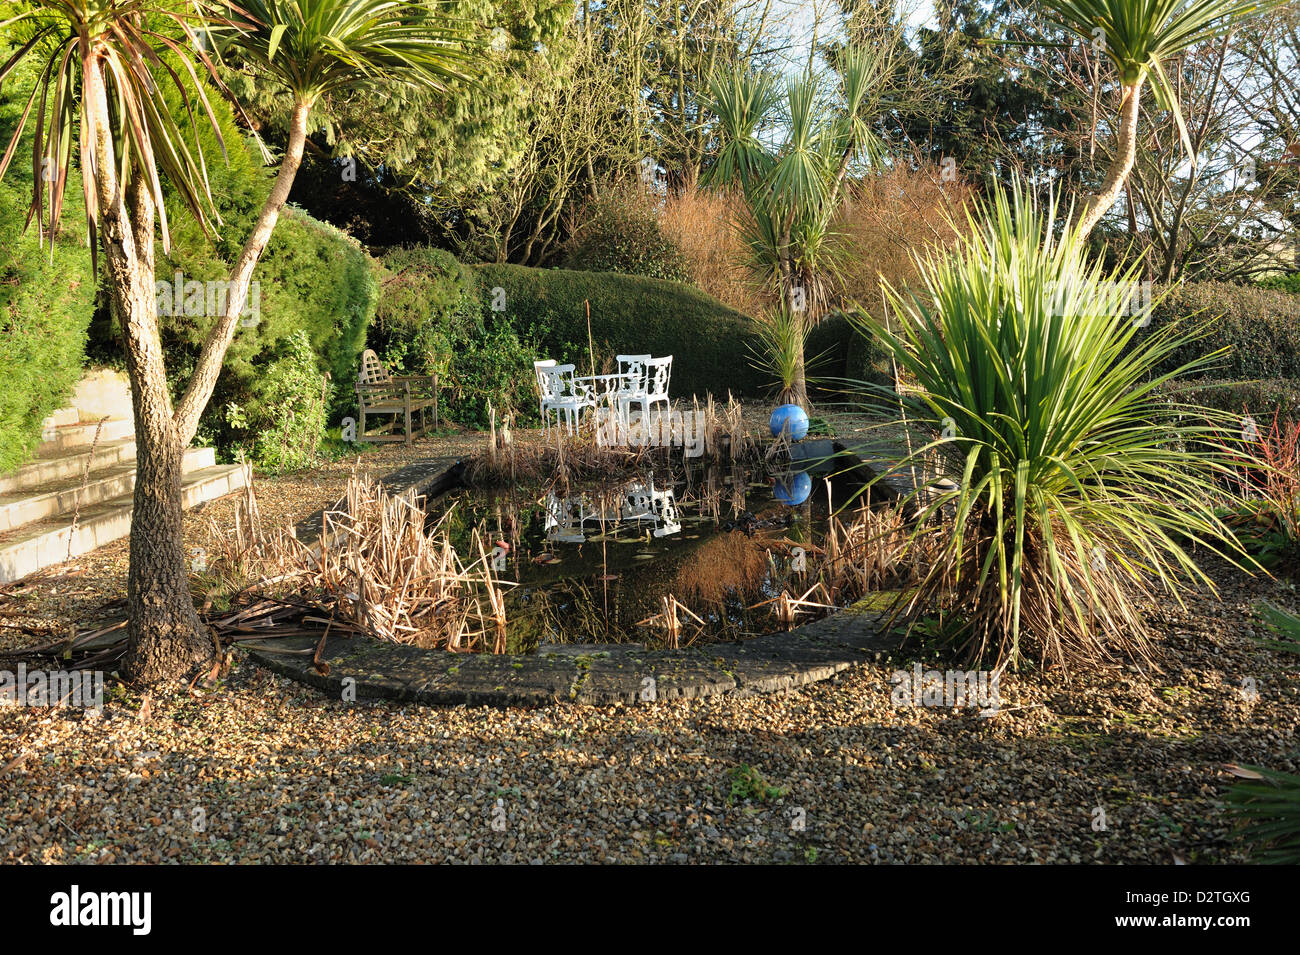 Formal garden pond with dead rushes and irises, garden table and chairs and Torbay palm trees, Cordyline australis, in winter Stock Photo